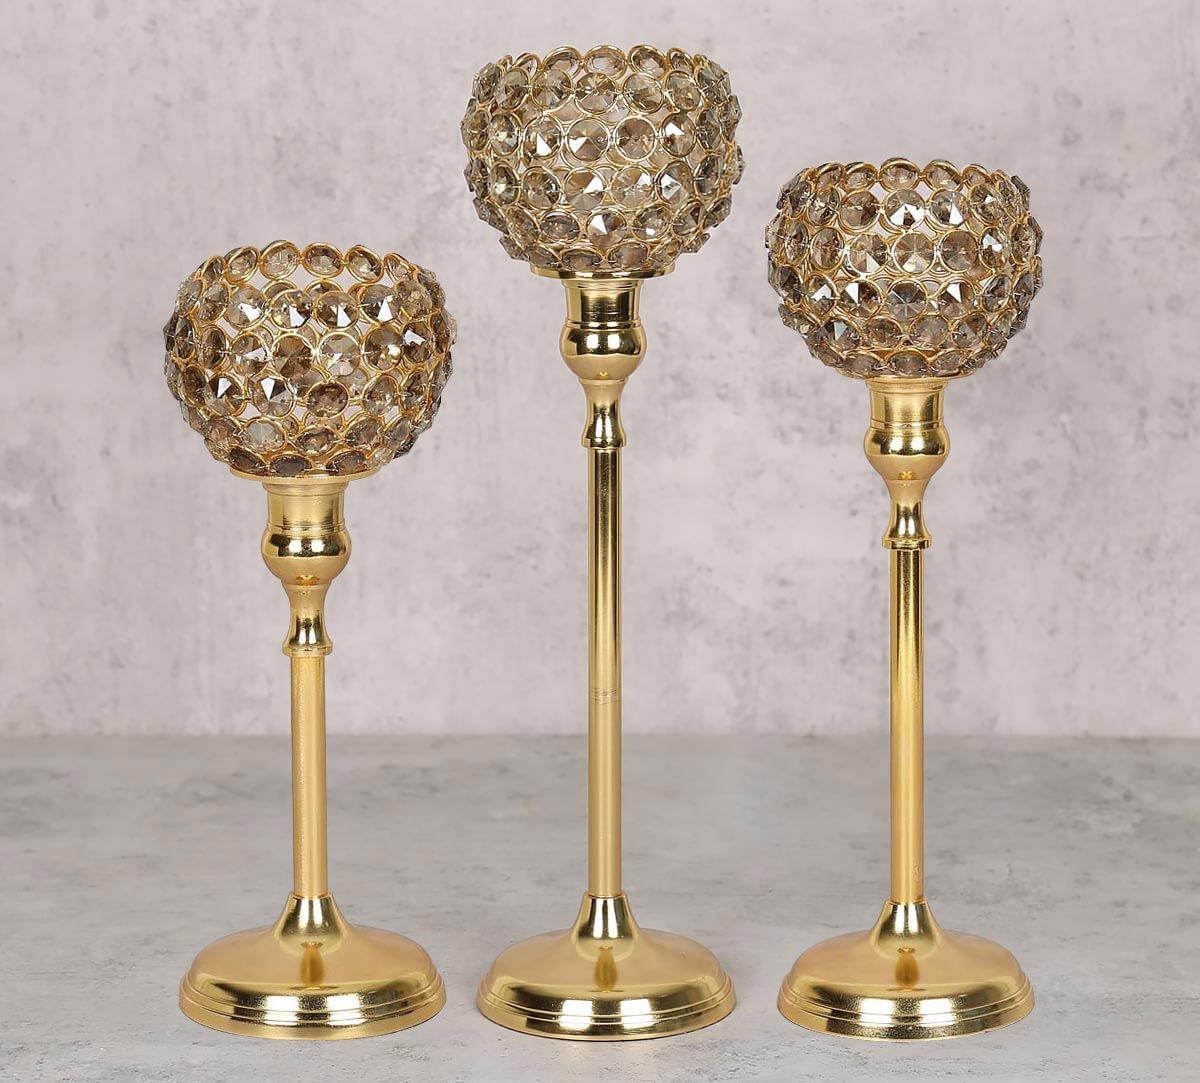 India Circus Grey Crystal Candle Holder Set of 3